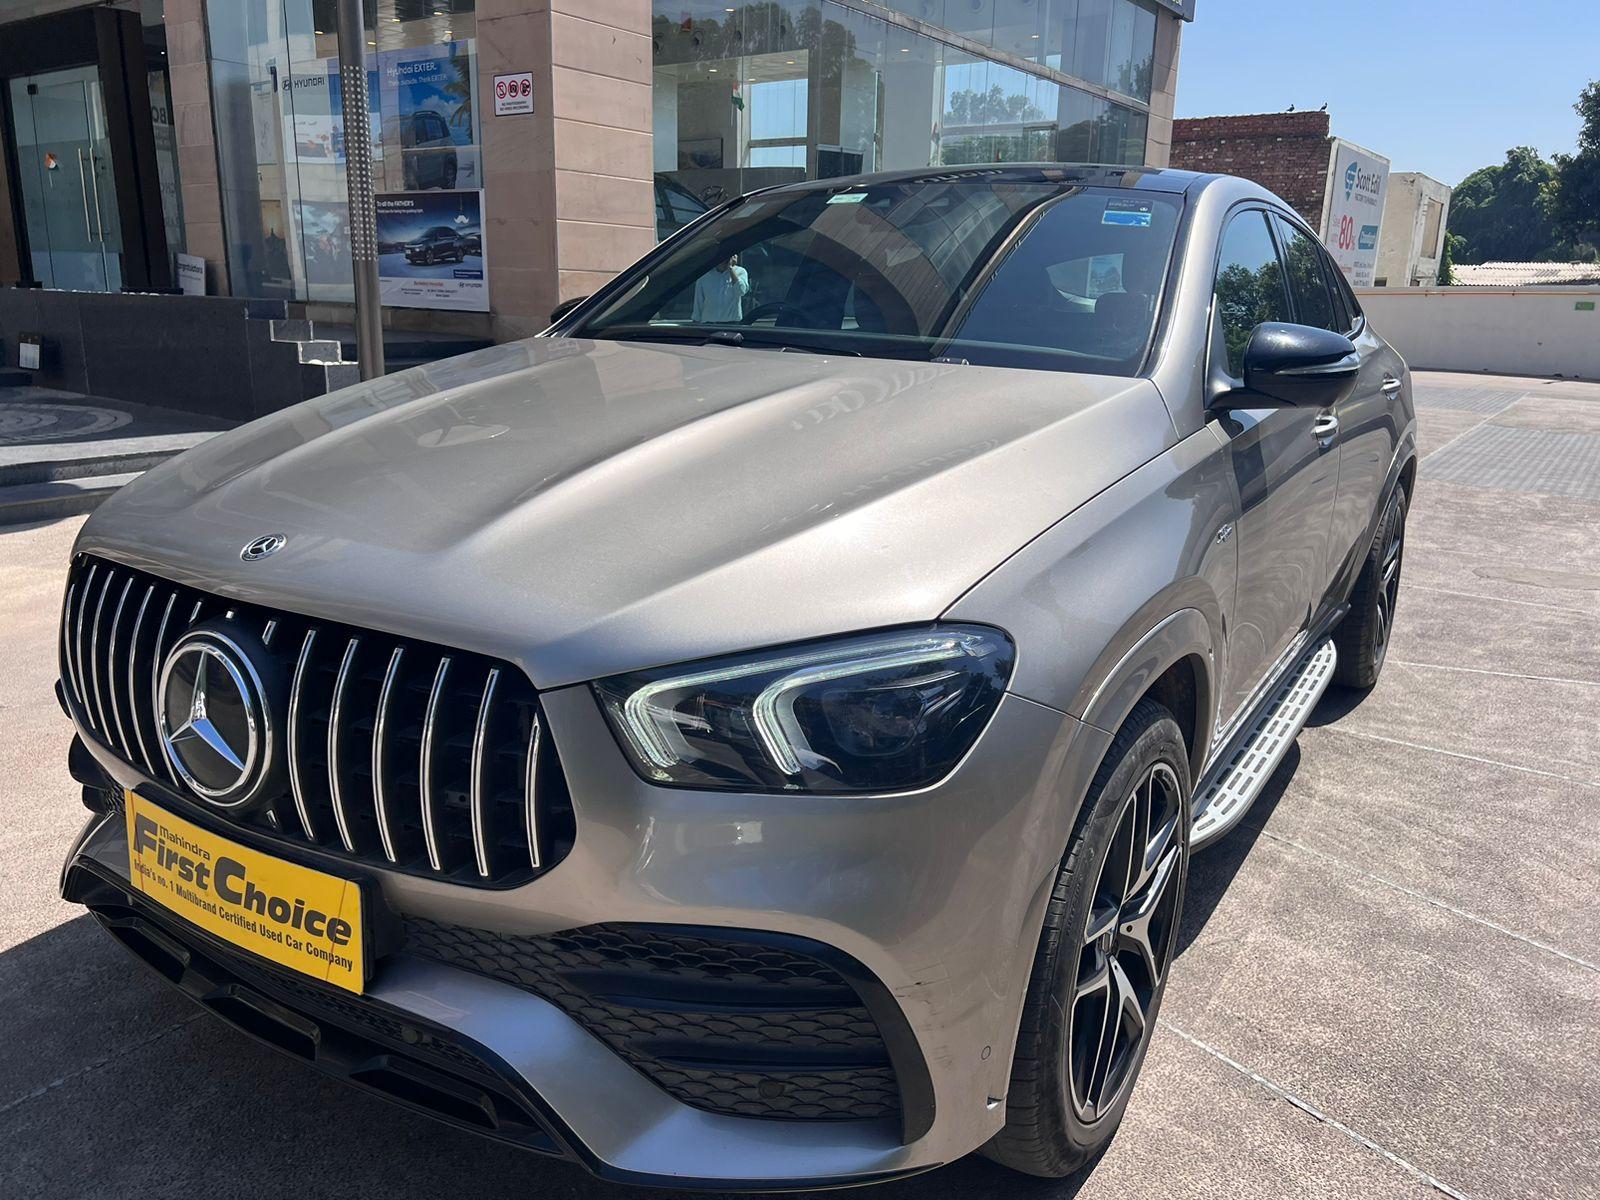 2020 Mercedes-AMG GLE Coupe 53 4MATIC Plus Coupe